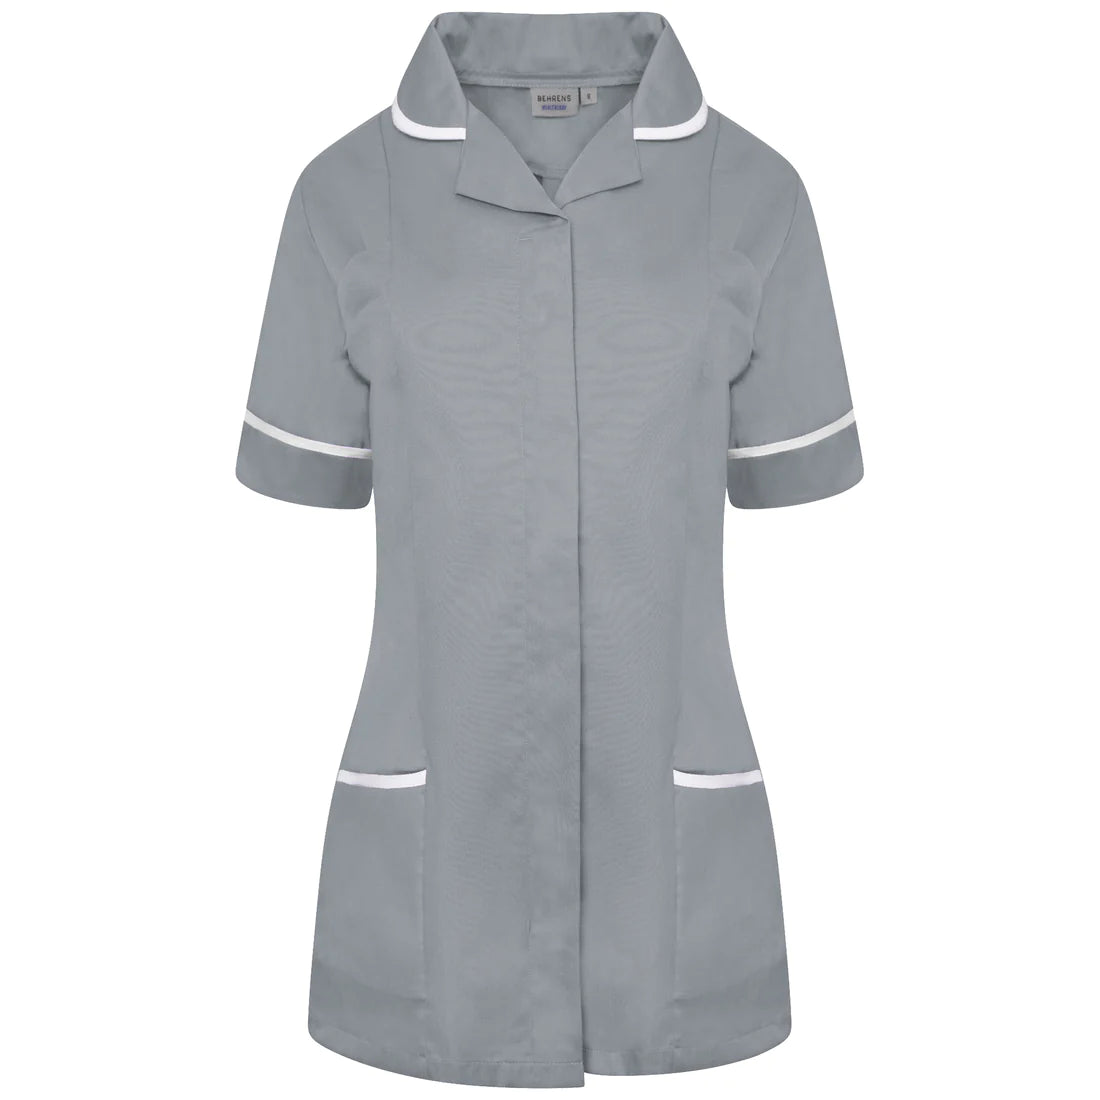 Grey/White Contrast Ladies Tunic with Round Collar - NCLTPS